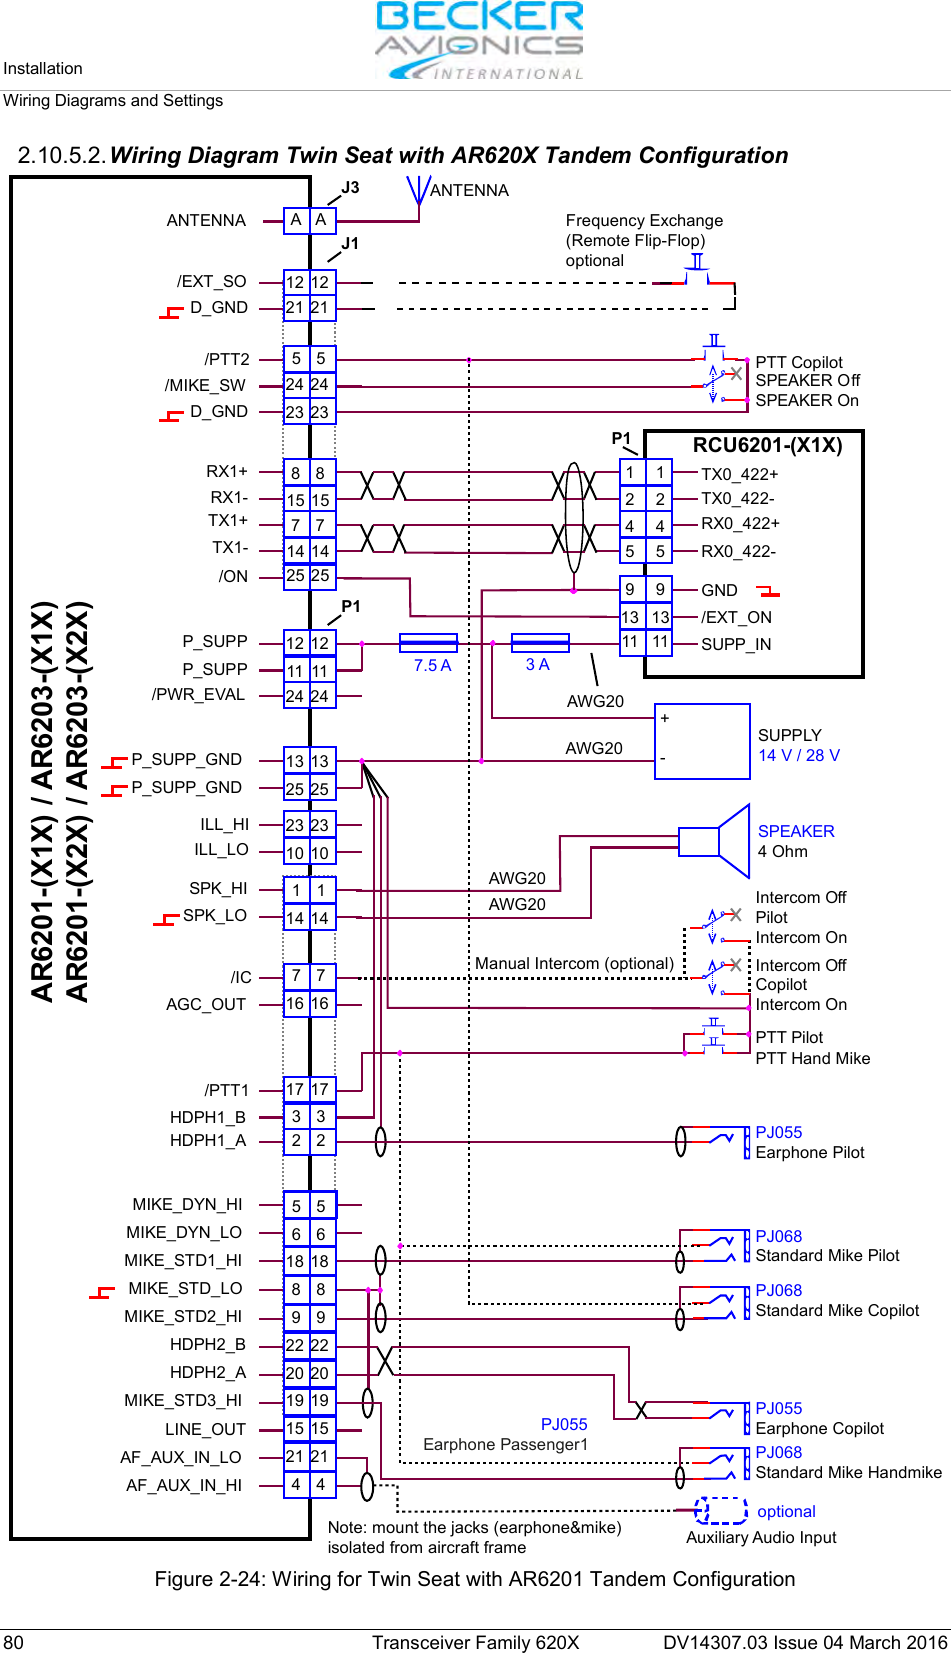 Installation   Wiring Diagrams and Settings  80 Transceiver Family 620X DV14307.03 Issue 04 March 2016 2.10.5.2. Wiring Diagram Twin Seat with AR620X Tandem Configuration AWG207.5 A 3 AAWG20AWG20AWG20+-SPEAKER4 OhmSUPPLY14 V / 28 VSPEAKER OffSPEAKER OnPTT CopilotManual Intercom (optional)PTT PilotIntercom OffPilotIntercom OnIntercom OffCopilotIntercom OnPTT Hand MikeFrequency Exchange(Remote Flip-Flop)optionalPJ055Earphone CopilotPJ055Earphone PilotPJ055Earphone Passenger1PJ068Standard Mike CopilotPJ068Standard Mike PilotPJ068Standard Mike HandmikeAuxiliary Audio InputNote: mount the jacks (earphone&amp;mike)isolated from aircraft frameoptionalAR6201-(X1X) / AR6203-(X1X)AR6201-(X2X) / AR6203-(X2X)ANTENNAJ3J1P1P1AA12 1221 215 524 2423 2312 1211 1124 248 815 157 714 1425 25 9 913 1311 112 21 14 45 51 114 147 716 1617 173 32 25 56 618 188 89 922 2220 2019 1915 1521 214 423 2310 1013 1325 25ILL_HISPK_HISPK_LO/ICAGC_OUT/PTT1HDPH1_BHDPH1_AHDPH2_BHDPH2_AMIKE_DYN_LOMIKE_DYN_HIMIKE_STD1_HIMIKE_STD2_HIMIKE_STD3_HILINE_OUTAF_AUX_IN_LOAF_AUX_IN_HIMIKE_STD_LOILL_LOP_SUPPP_SUPP_GNDP_SUPP_GNDP_SUPP/PWR_EVALANTENNA/EXT_SO/PTT2/MIKE_SWD_GNDD_GNDRX1+RX1-TX1+TX1-/ONTX0_422+TX0_422-RX0_422+RX0_422-GND/EXT_ONSUPP_INRCU6201-(X1X) Figure 2-24: Wiring for Twin Seat with AR6201 Tandem Configuration  